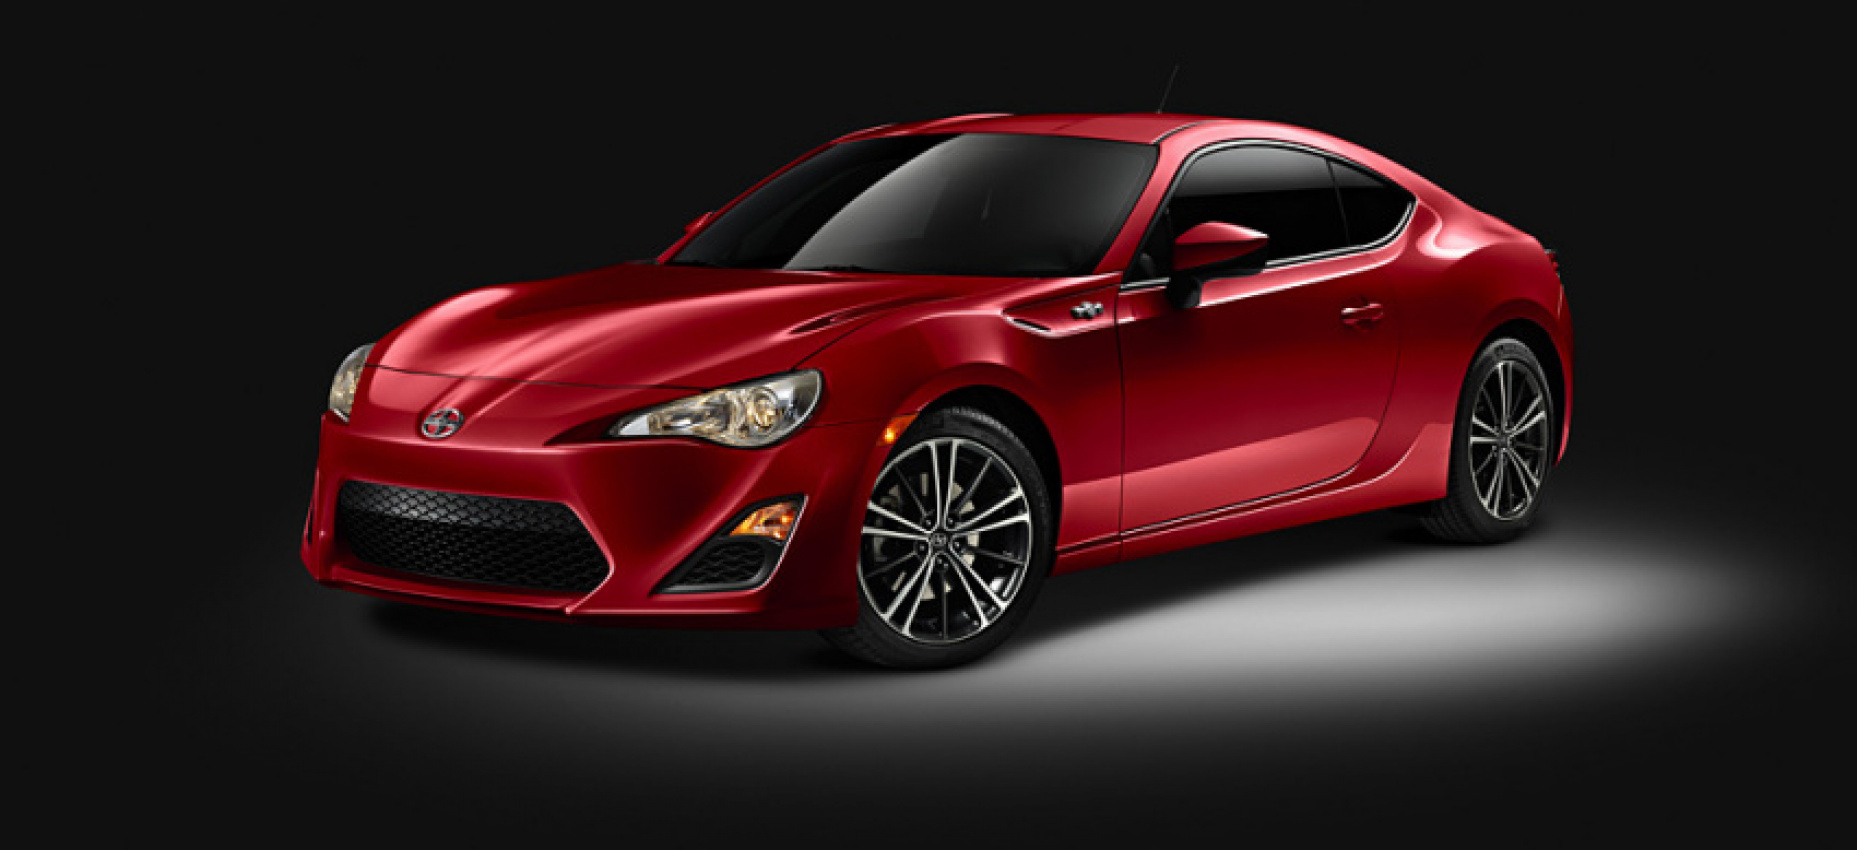 autos, cars, review, scion, 2010s cars, compact cars, small cars, 2012 scion fr-s